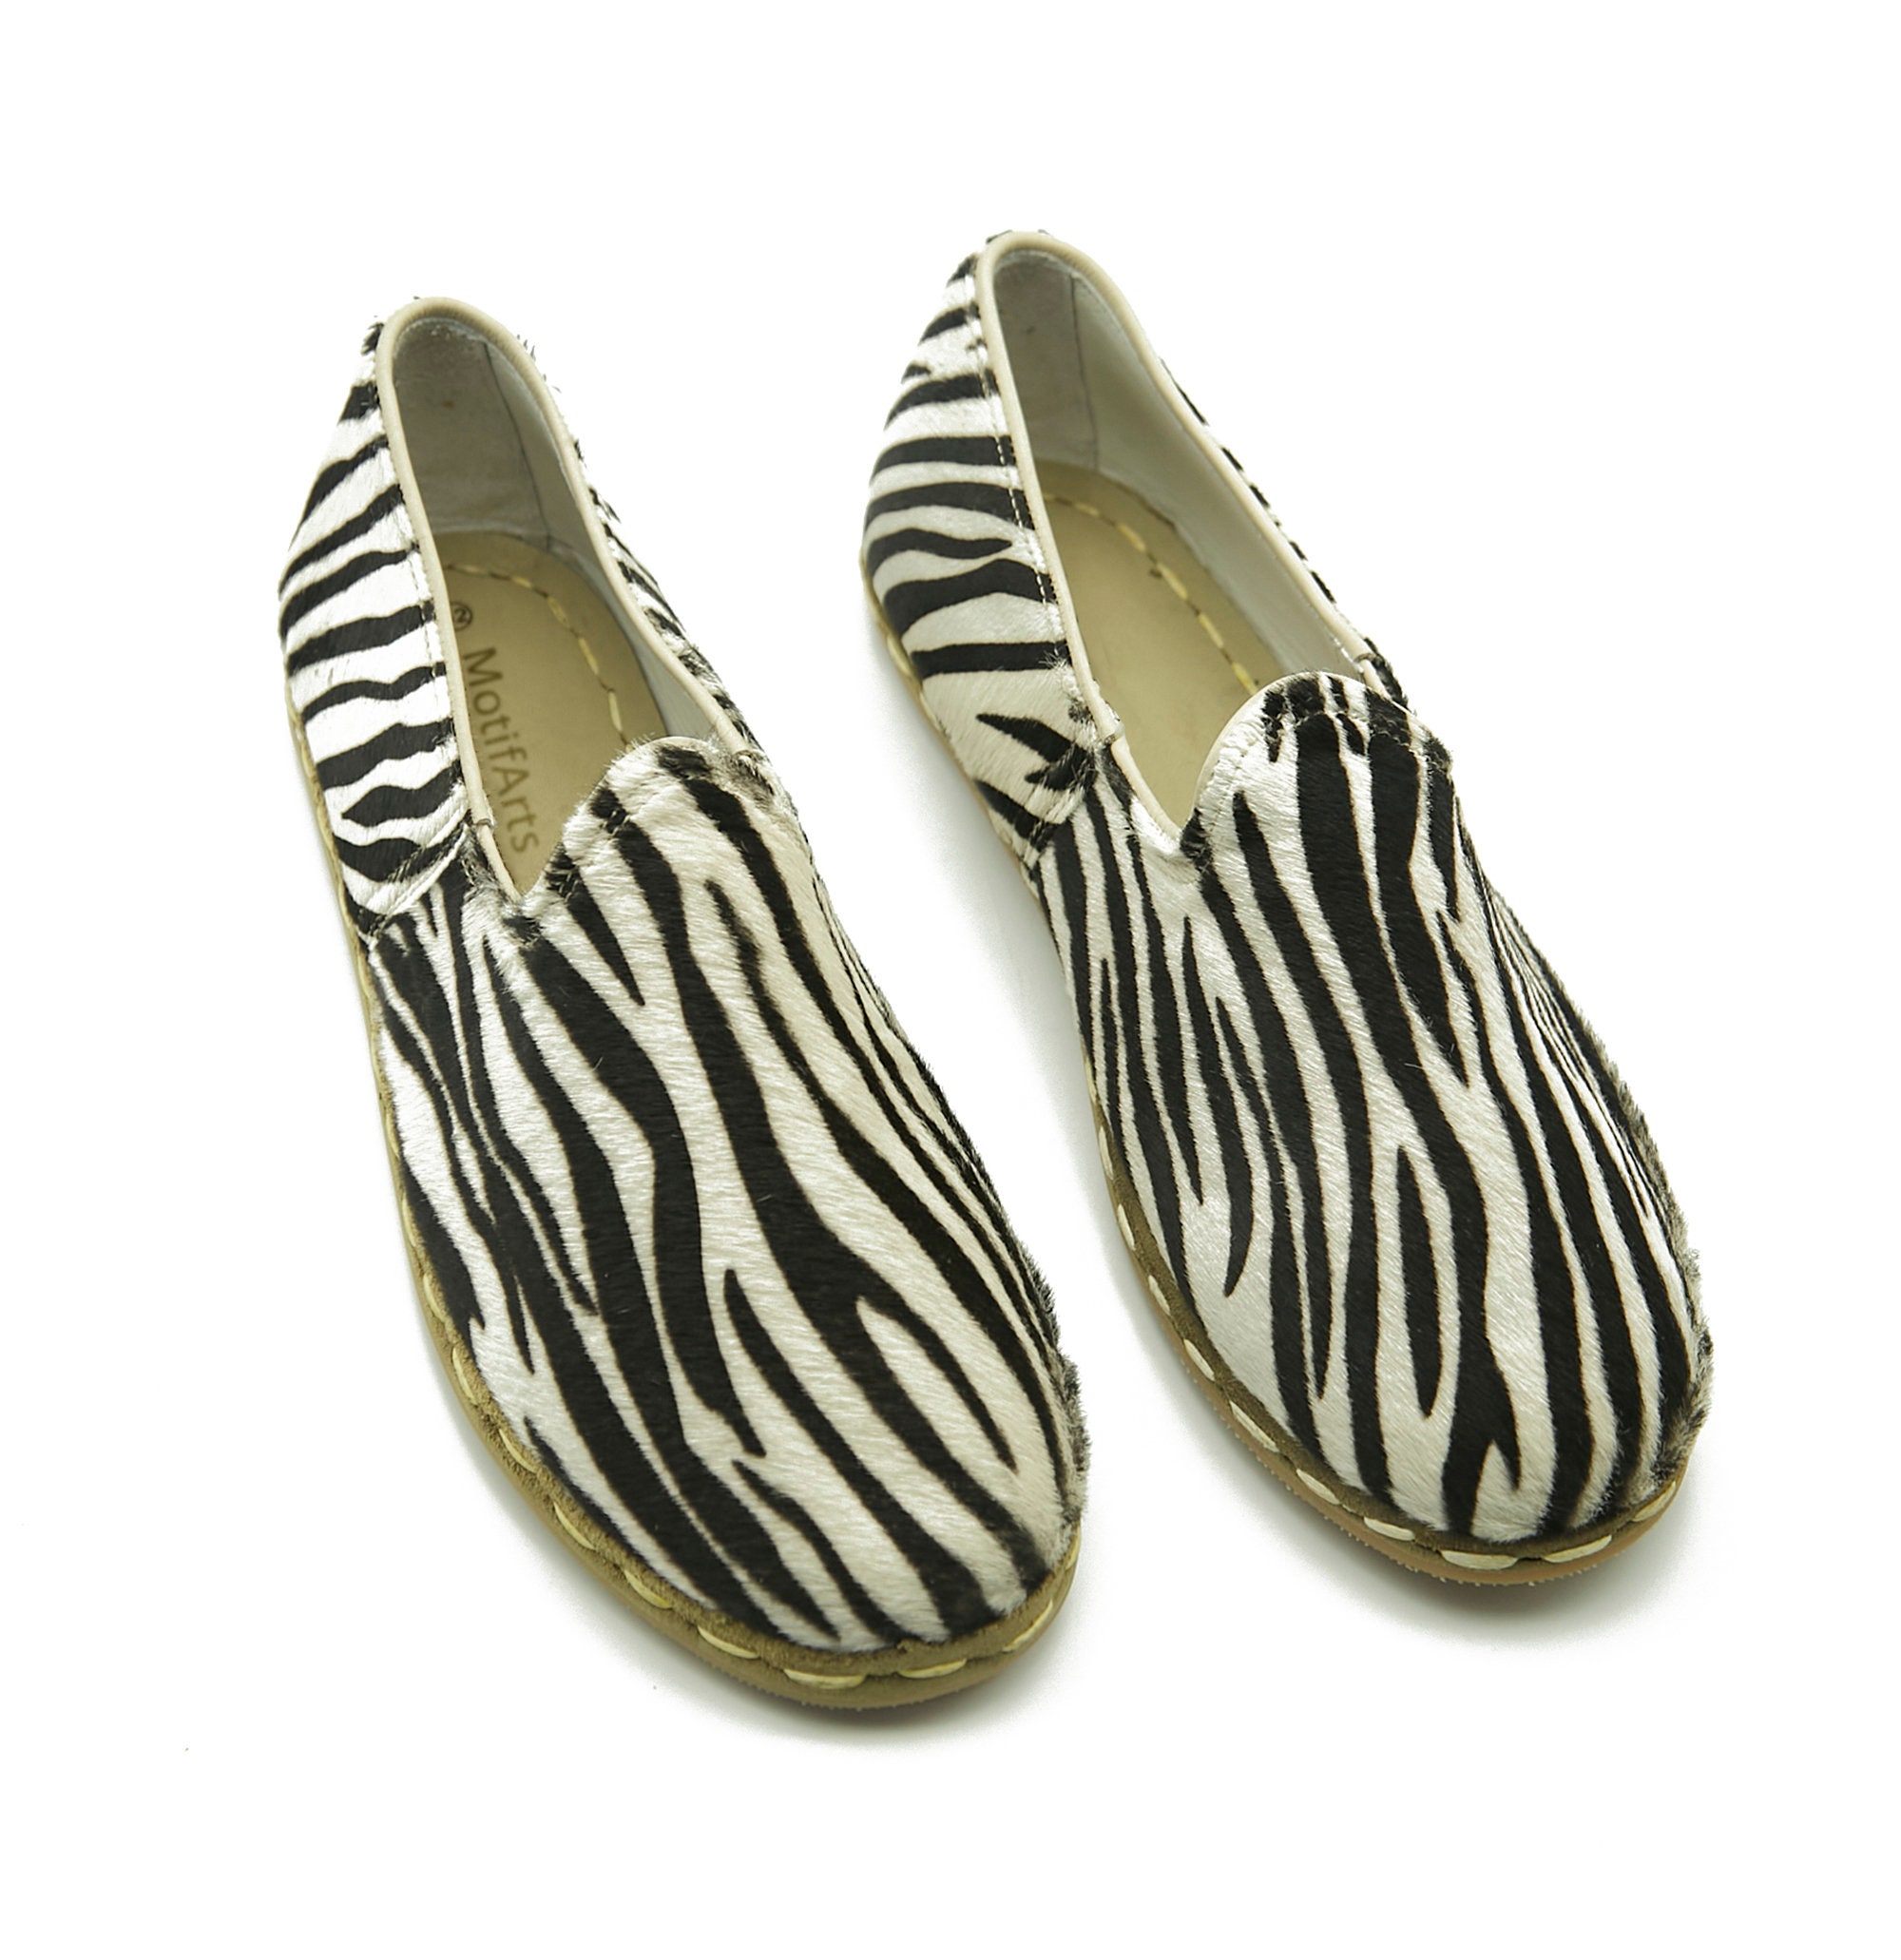 Zebra Yemeni Shoes , Women's Shoes , Turkish Handmade Leather Slippers ,  Barefoot Shoes , Gift for Her, Boho Shoes, Travel Shoes -  Canada